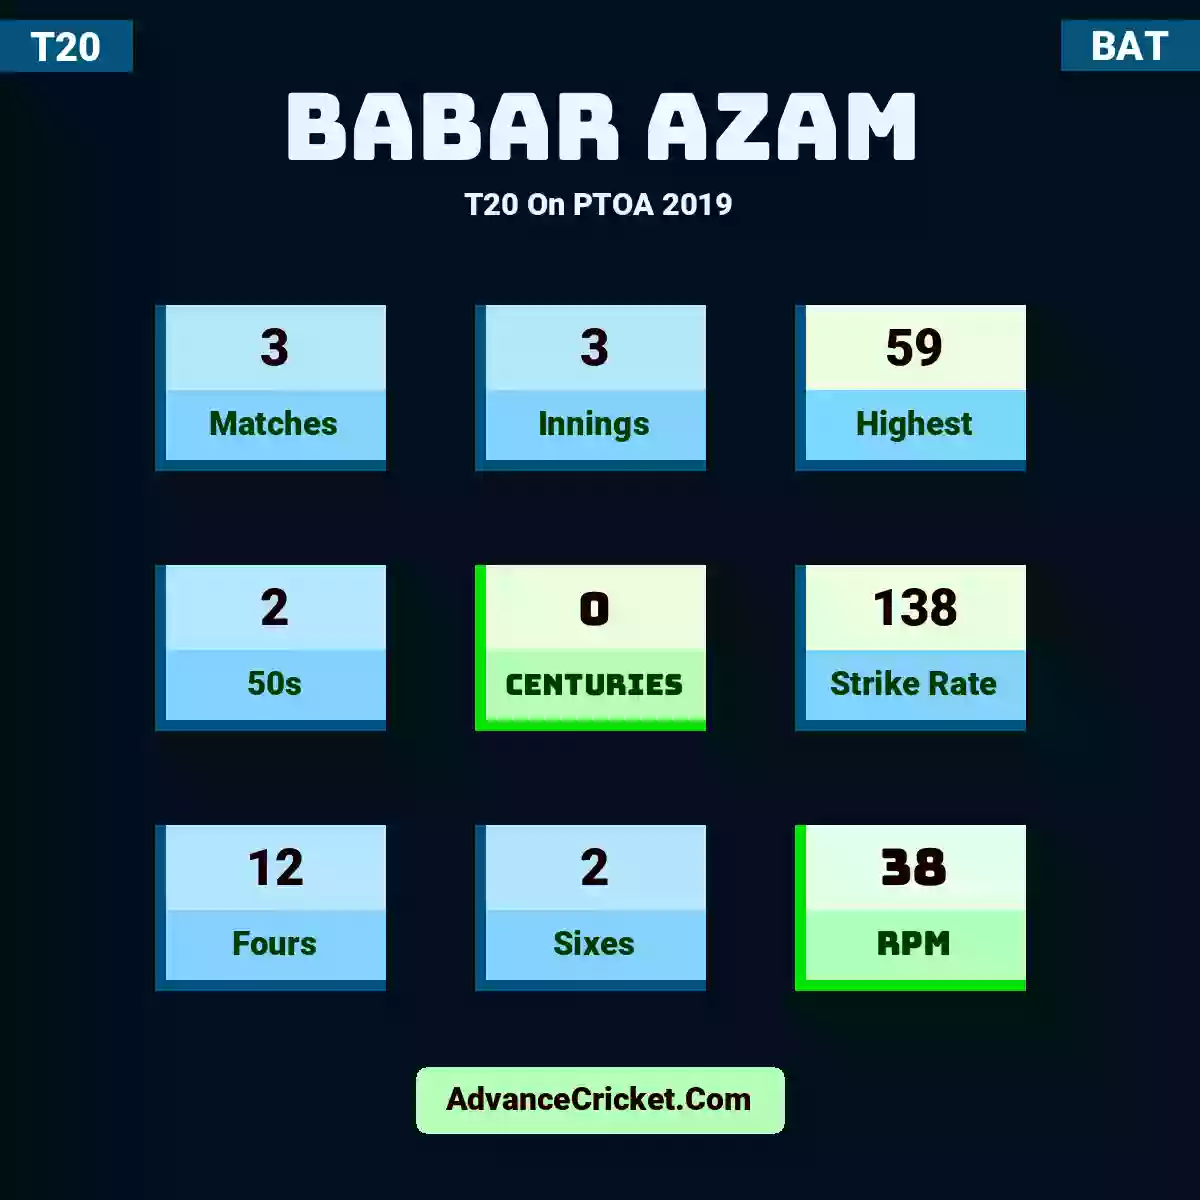 Babar Azam T20  On PTOA 2019, Babar Azam played 3 matches, scored 59 runs as highest, 2 half-centuries, and 0 centuries, with a strike rate of 138. B.Azam hit 12 fours and 2 sixes, with an RPM of 38.